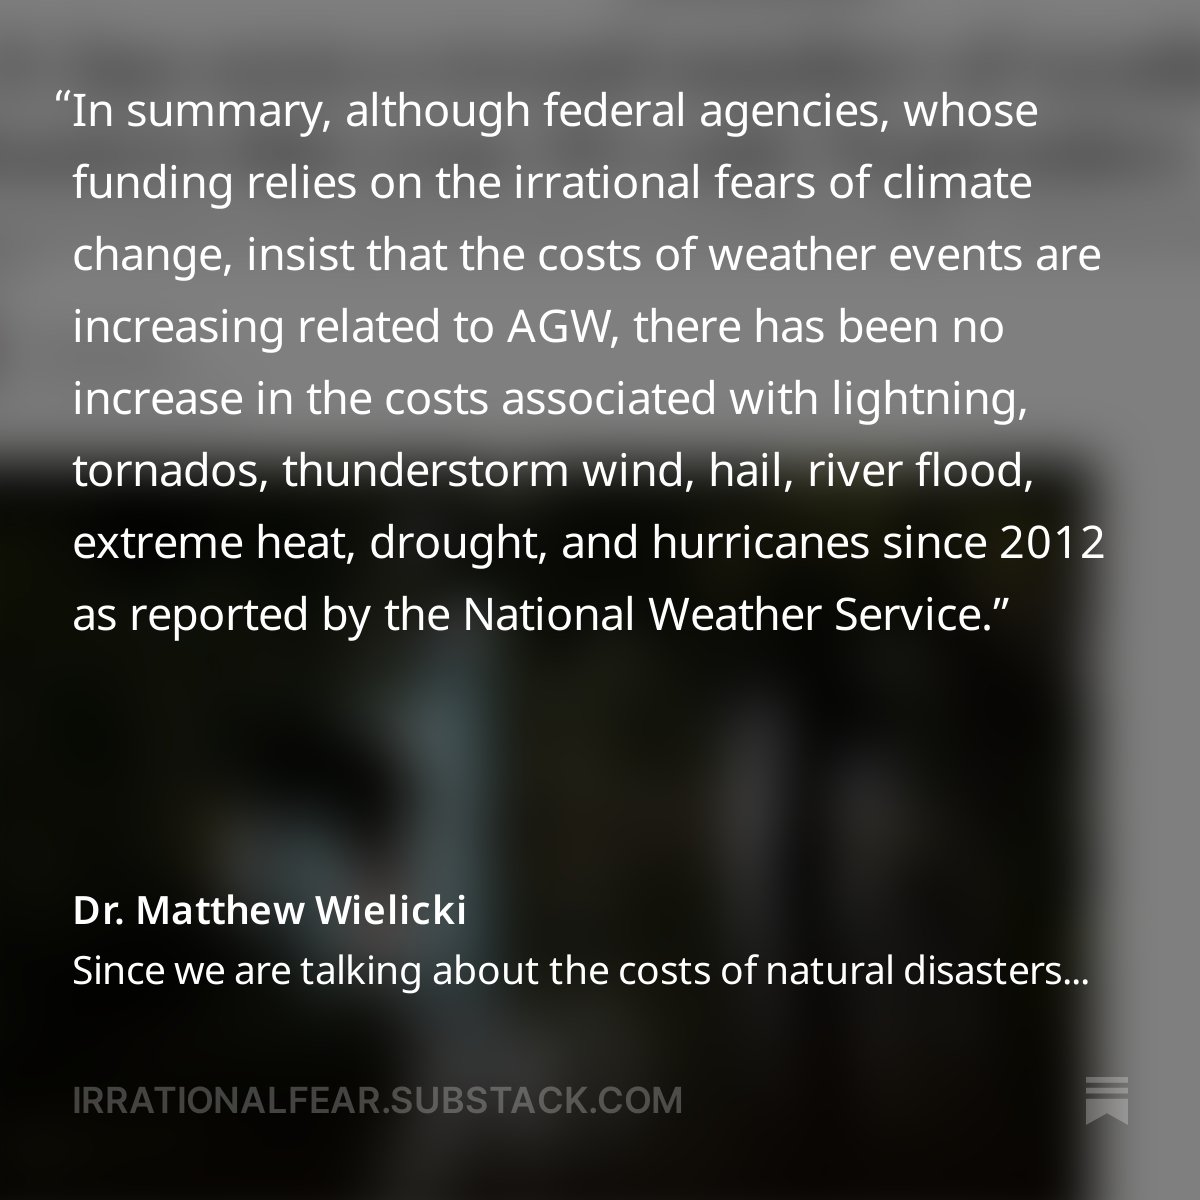 If you think that extreme weather has increased in recent years you have been manipulated by the climate-industrial complex to drive up your fear and give up your wealth and freedom. Read more here: irrationalfear.substack.com/p/since-we-are…